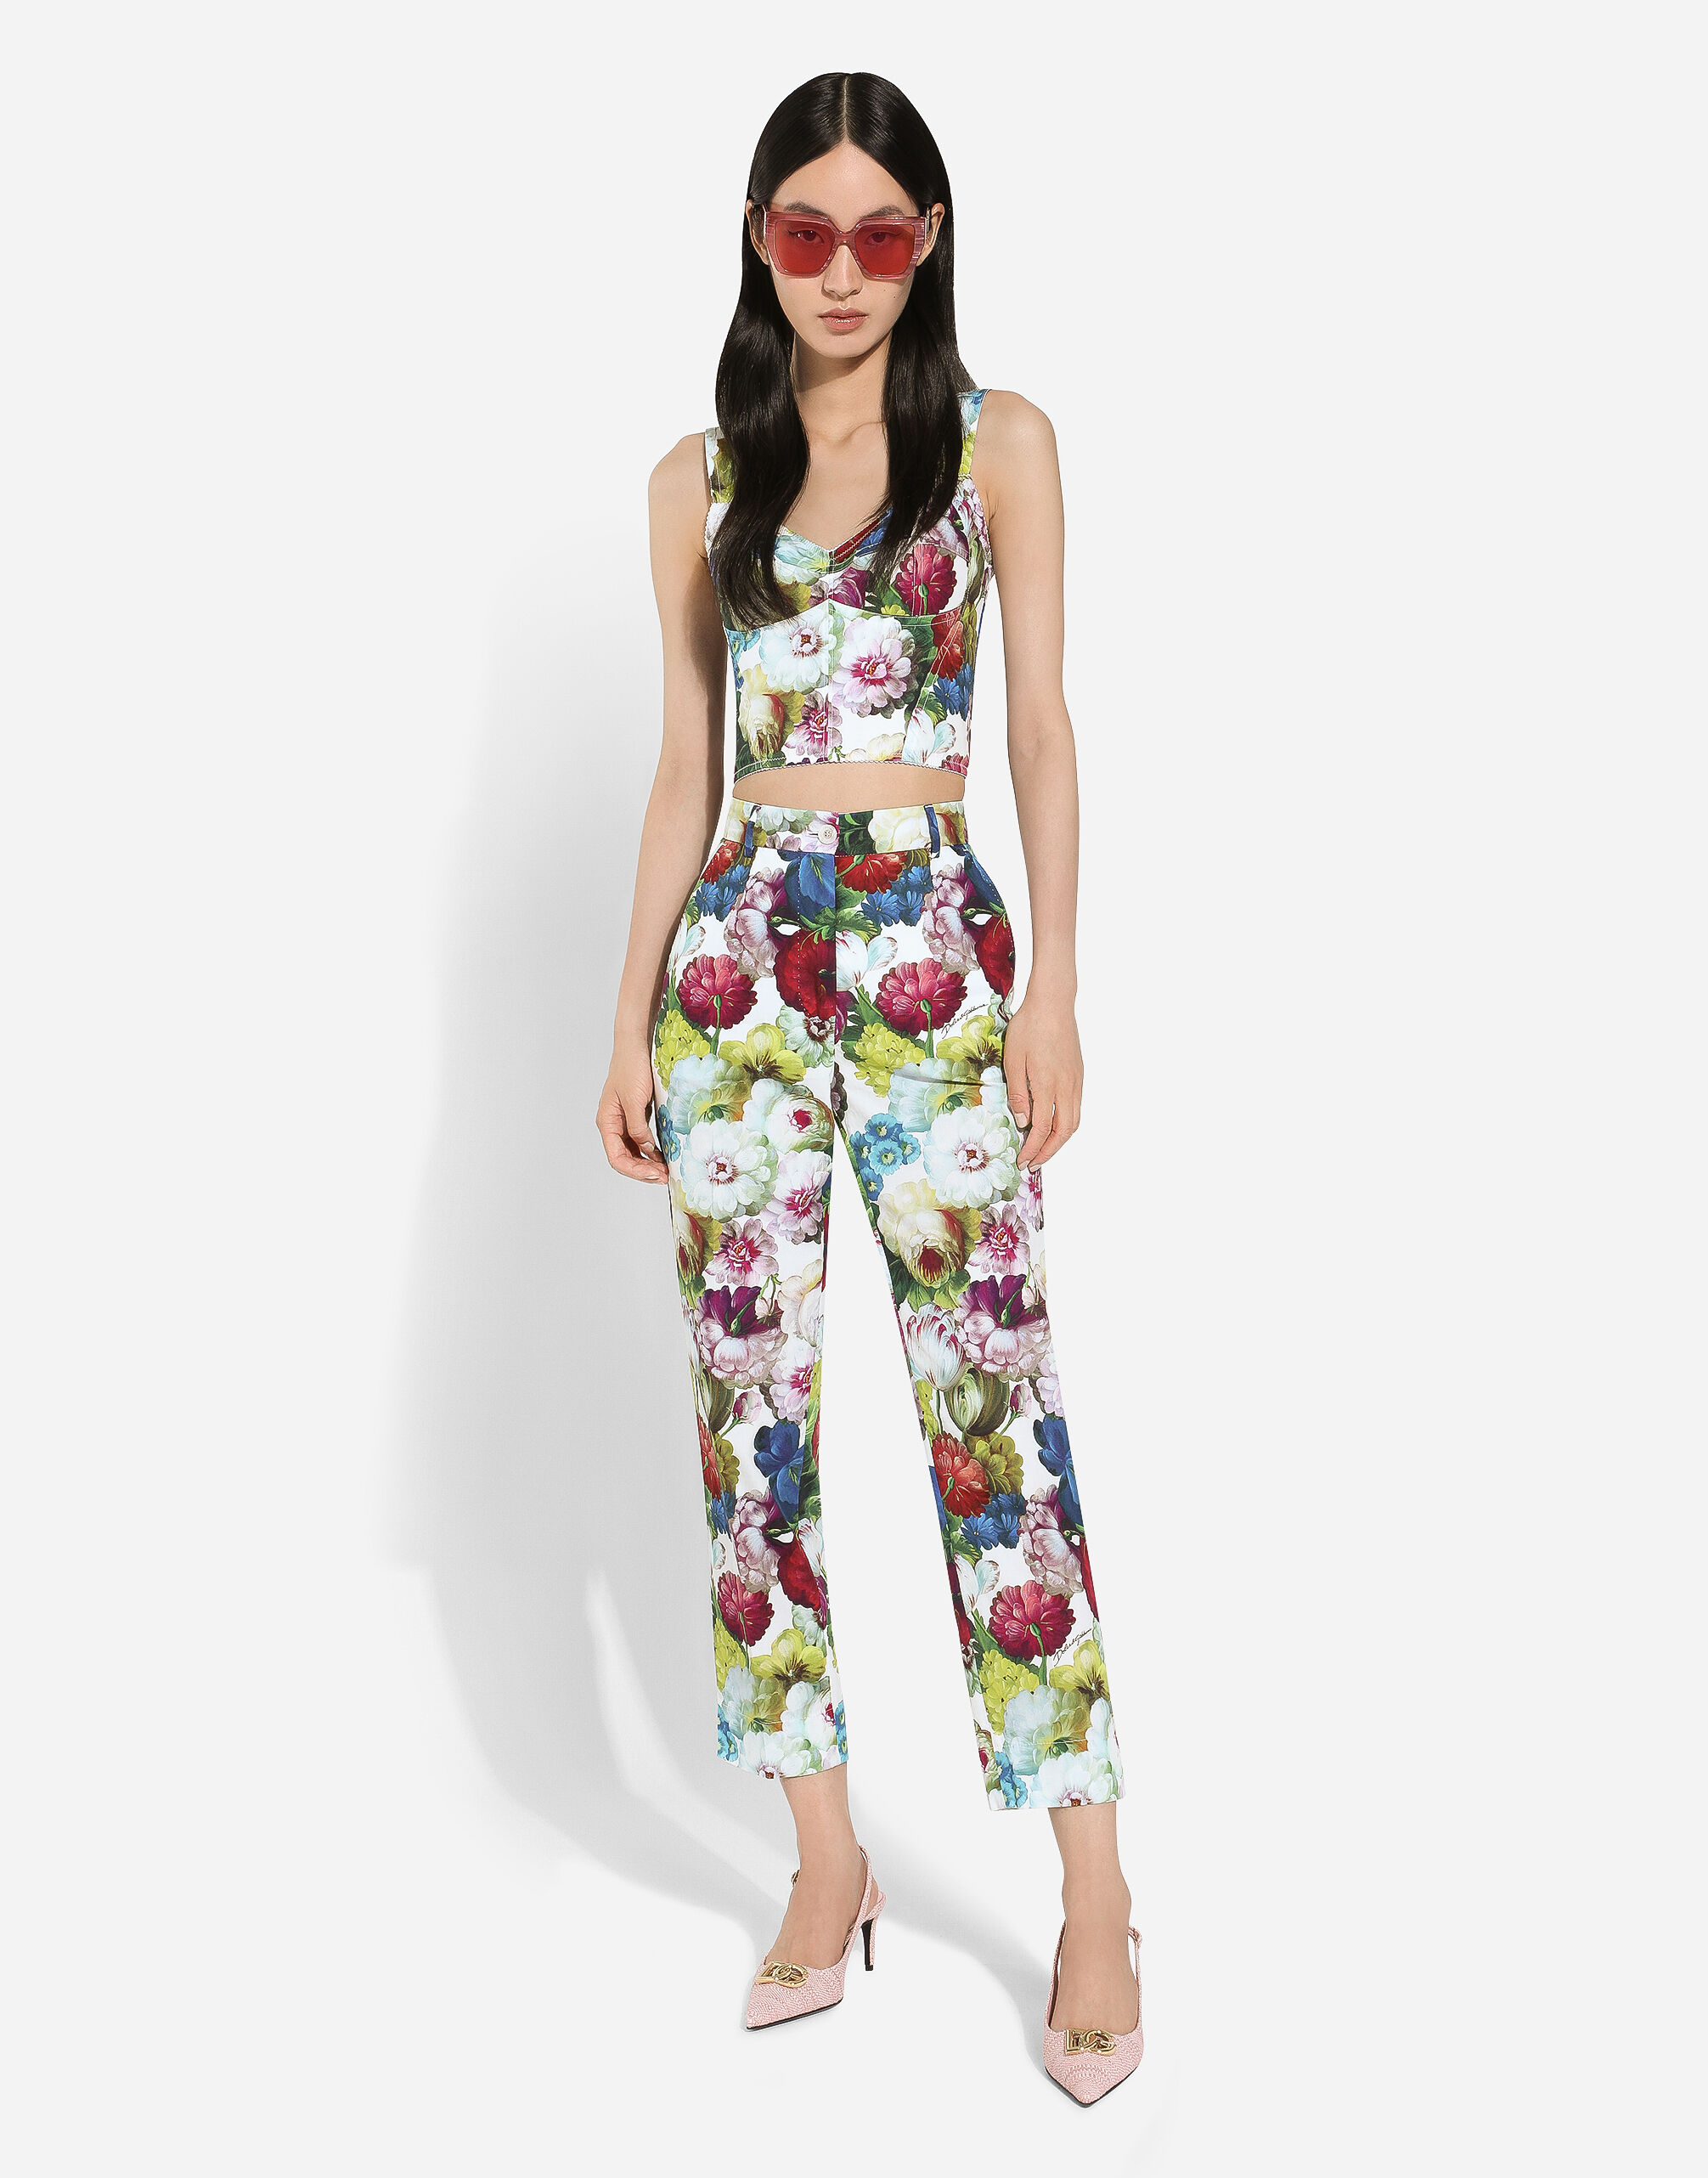 Flower Power Floral Flare Pants | Funky outfits, Hippie outfits, Funky pants